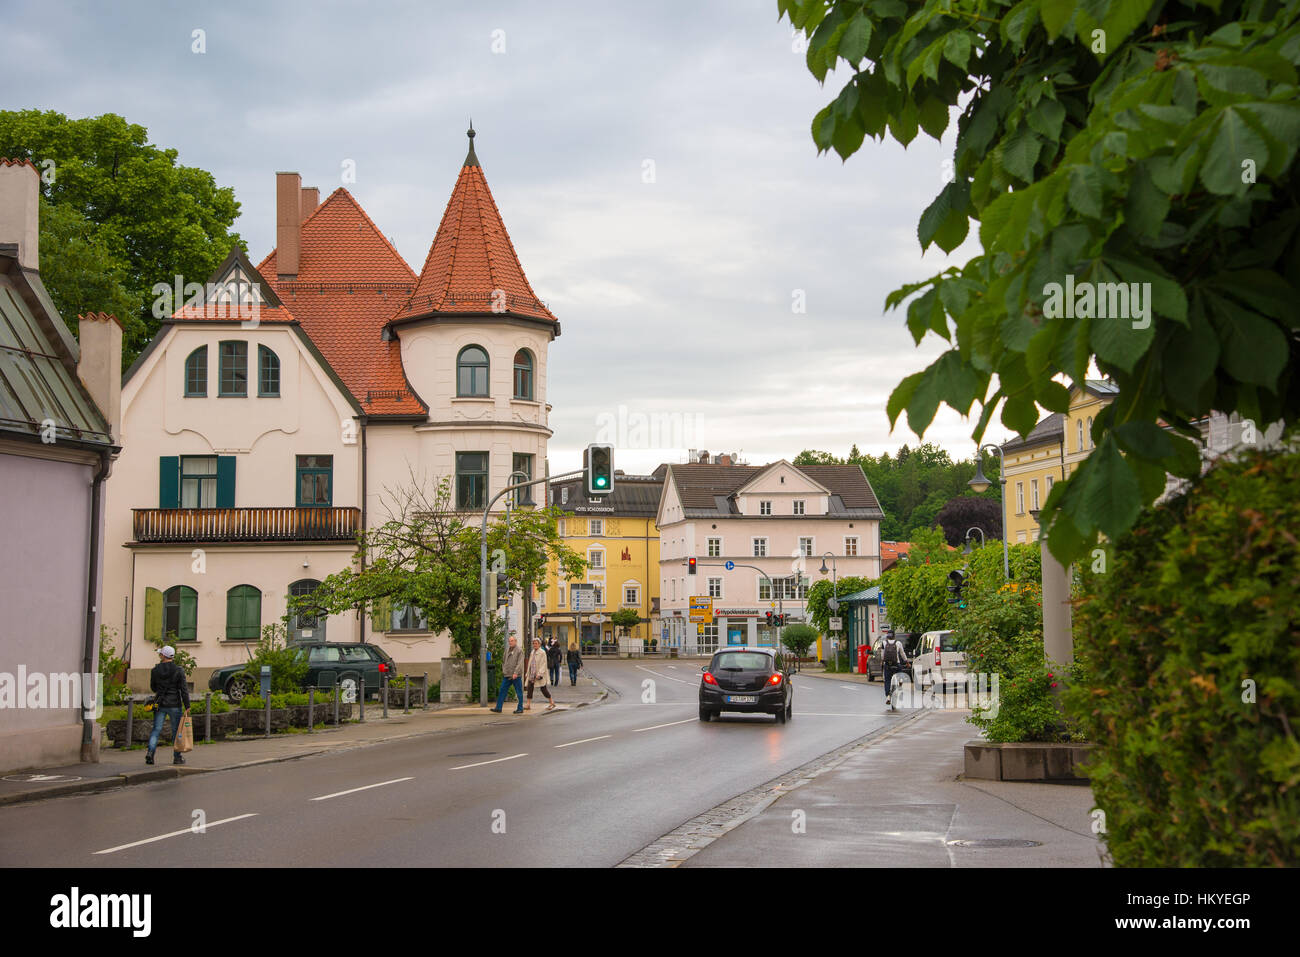 Fussen, Germany - June 4, 2016: View of historical street in Fussen with typical bavarian architecture buildings. Stock Photo